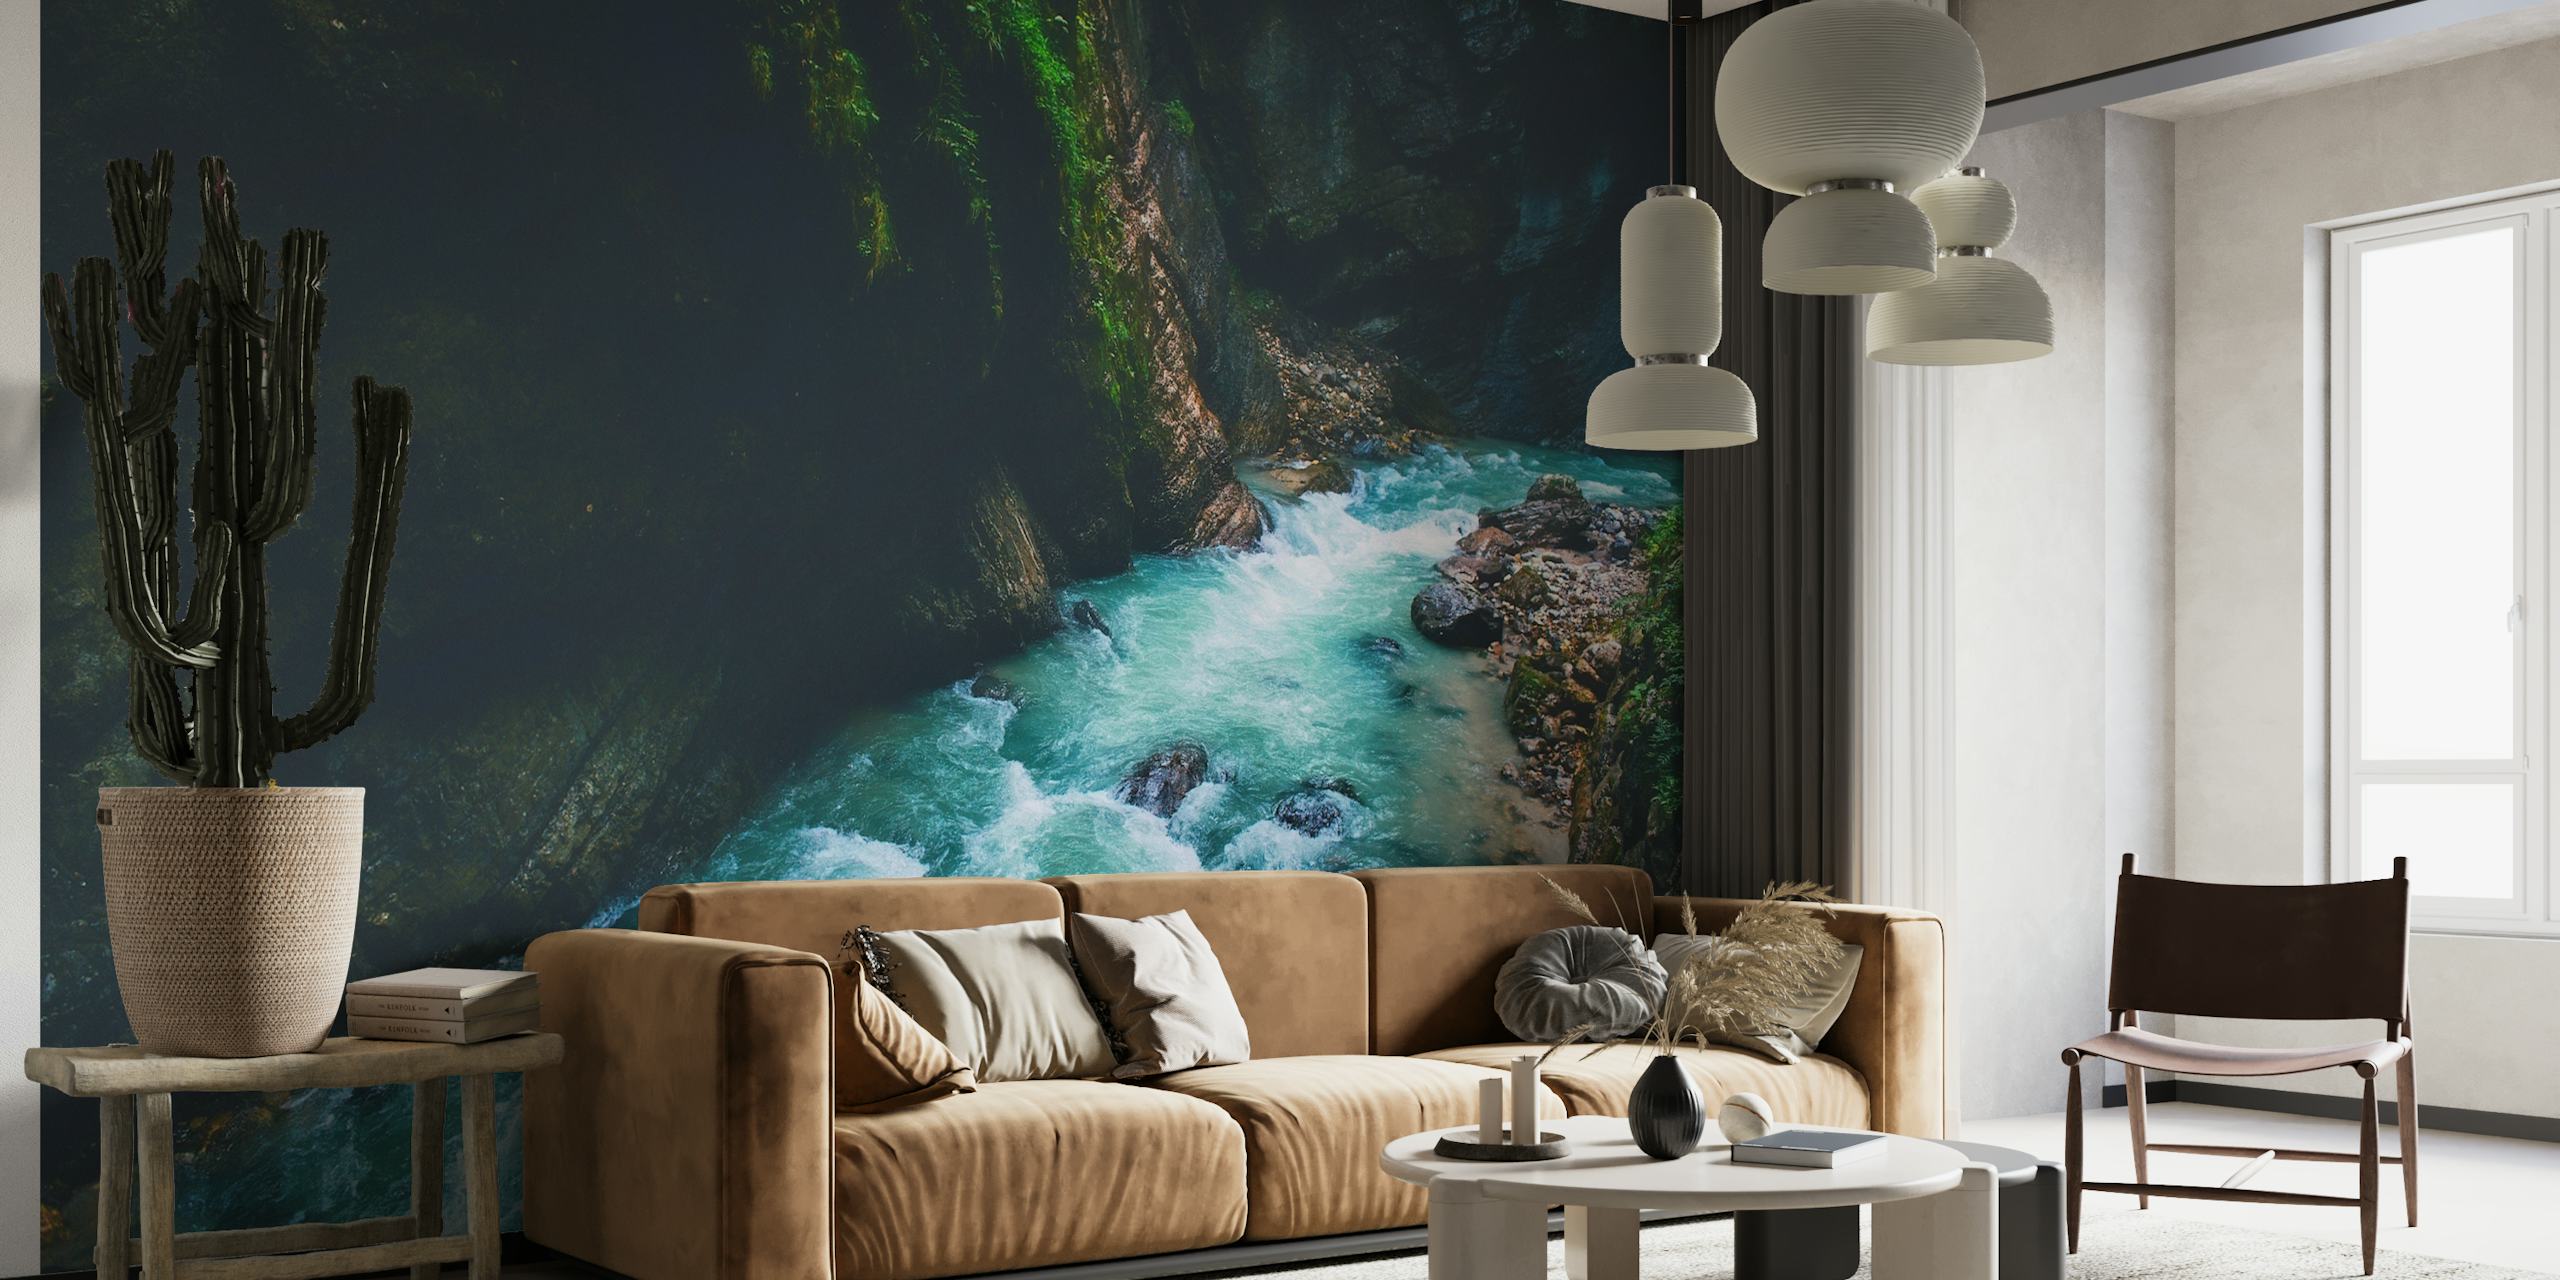 Mystic Water wall mural featuring a serene river flow with lush greenery